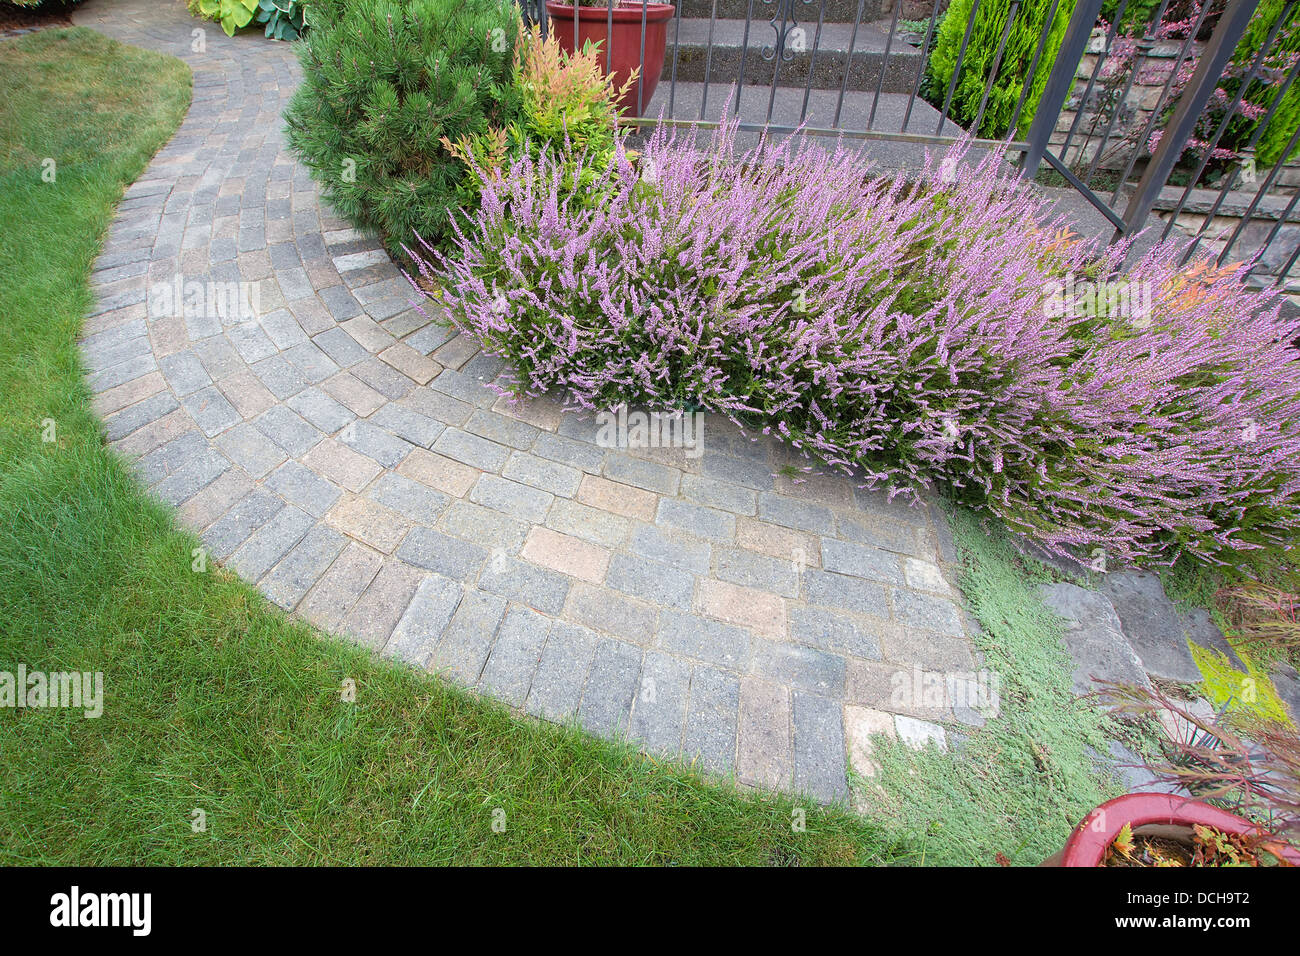 Front Yard Garden Curve Brick Paver Path with Green Grass Lawn Flowering Plants Trees and Shrubs Top View Stock Photo